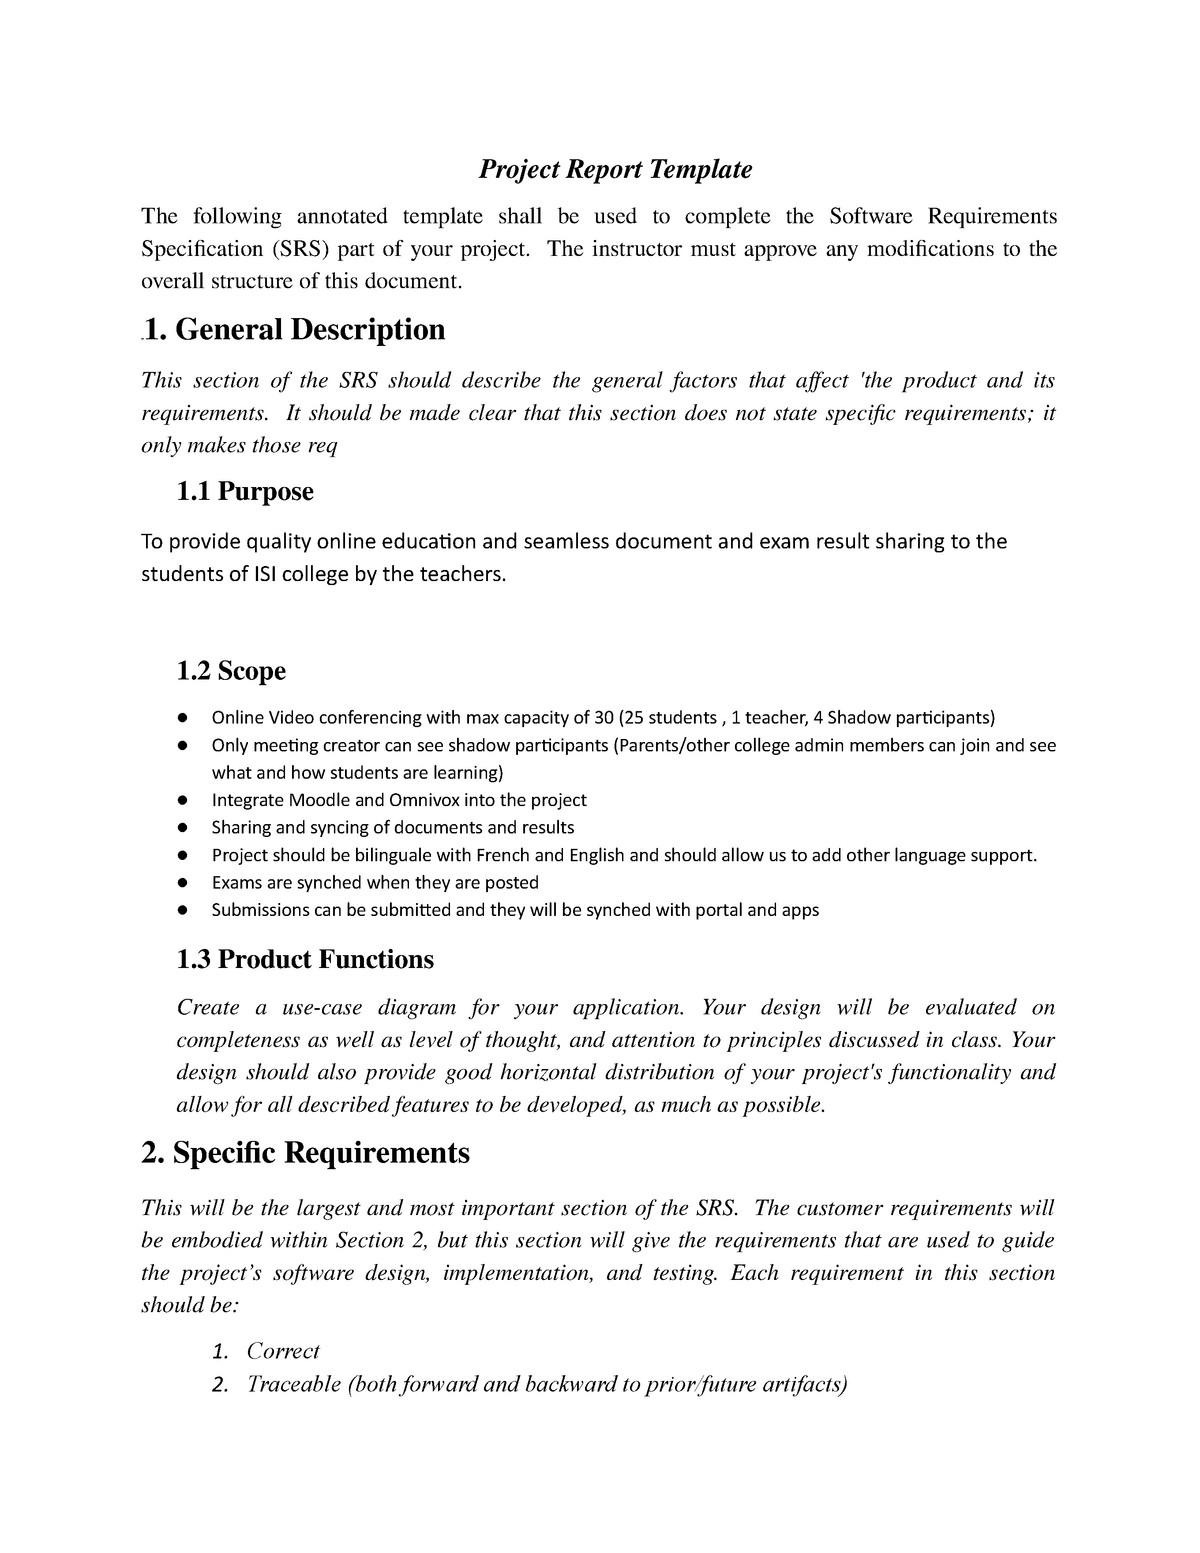 Project Part 2 template - Project Report Template The following ...